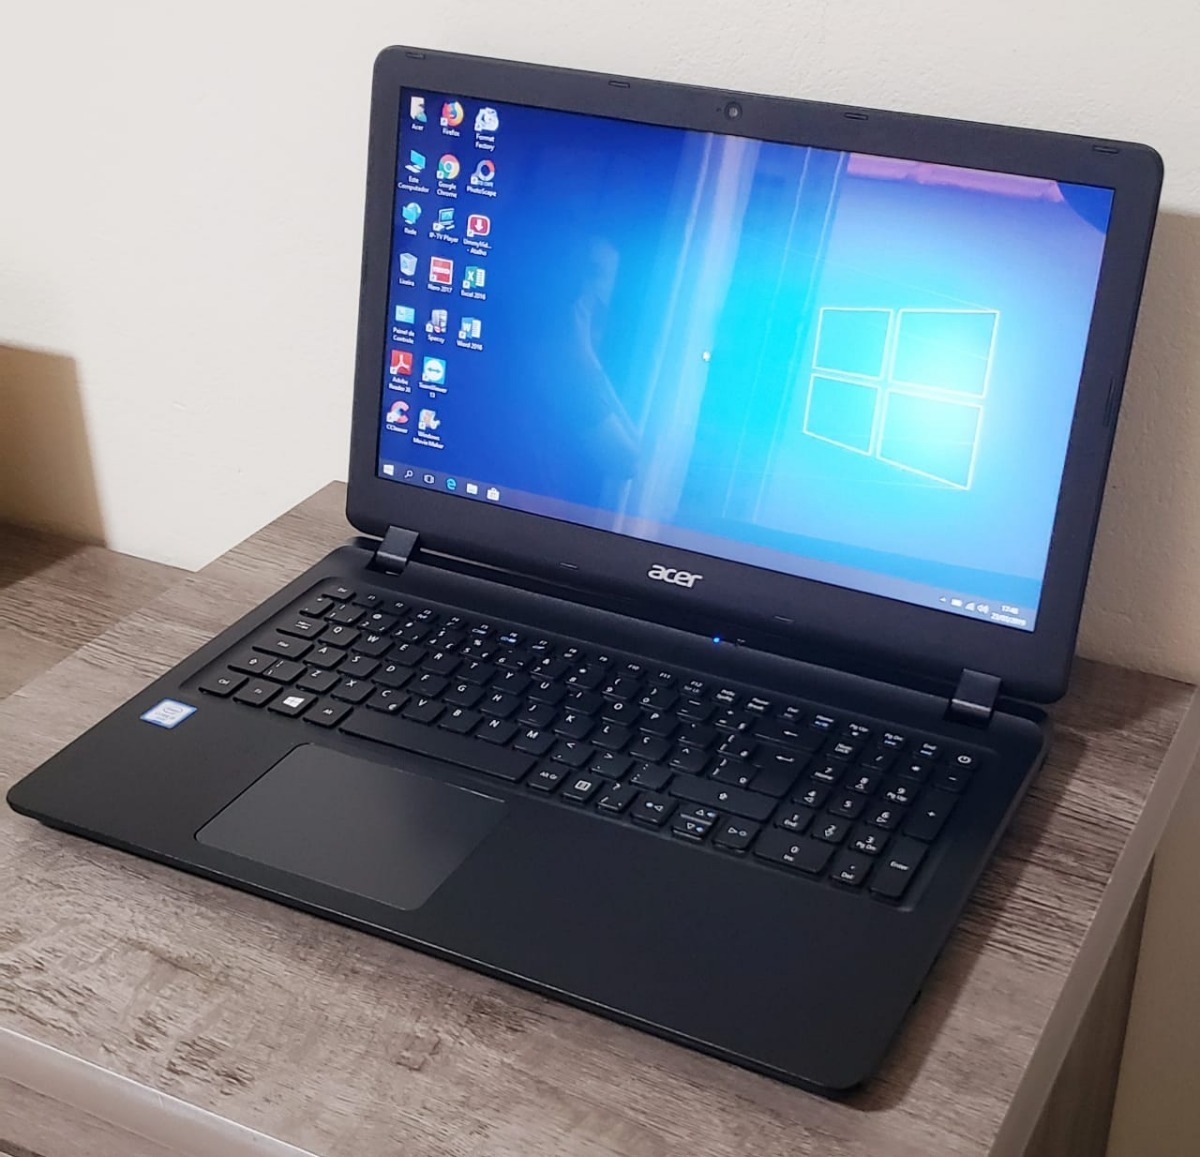 Acer core i3 1115g4